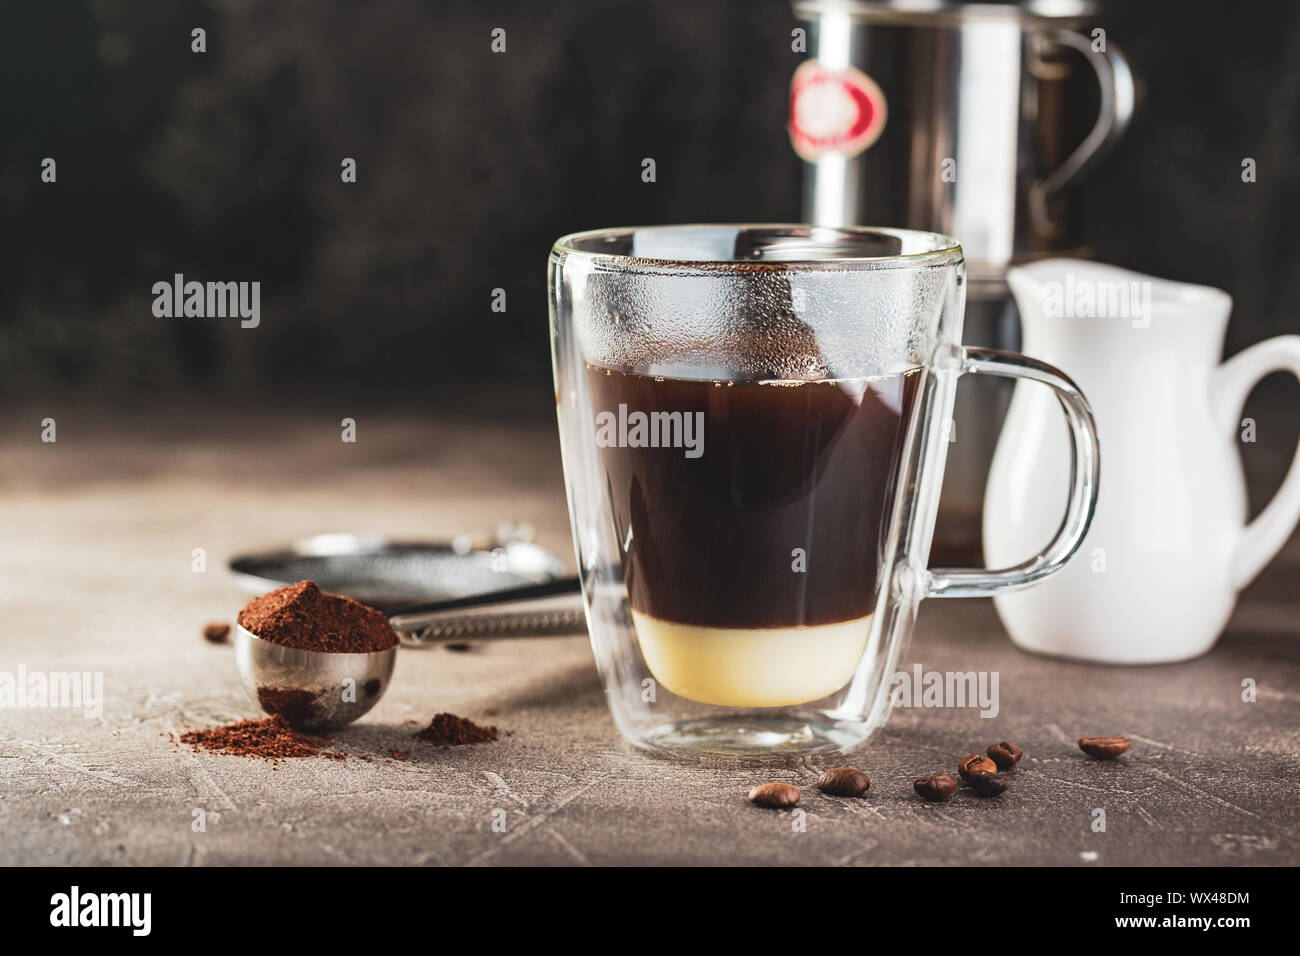 https://c8.alamy.com/comp/WX48DM/vietnamese-coffee-with-condensed-milk-in-glass-cups-and-traditional-metal-coffee-maker-phin-traditional-method-of-making-of-vietnamese-coffee-WX48DM.jpg